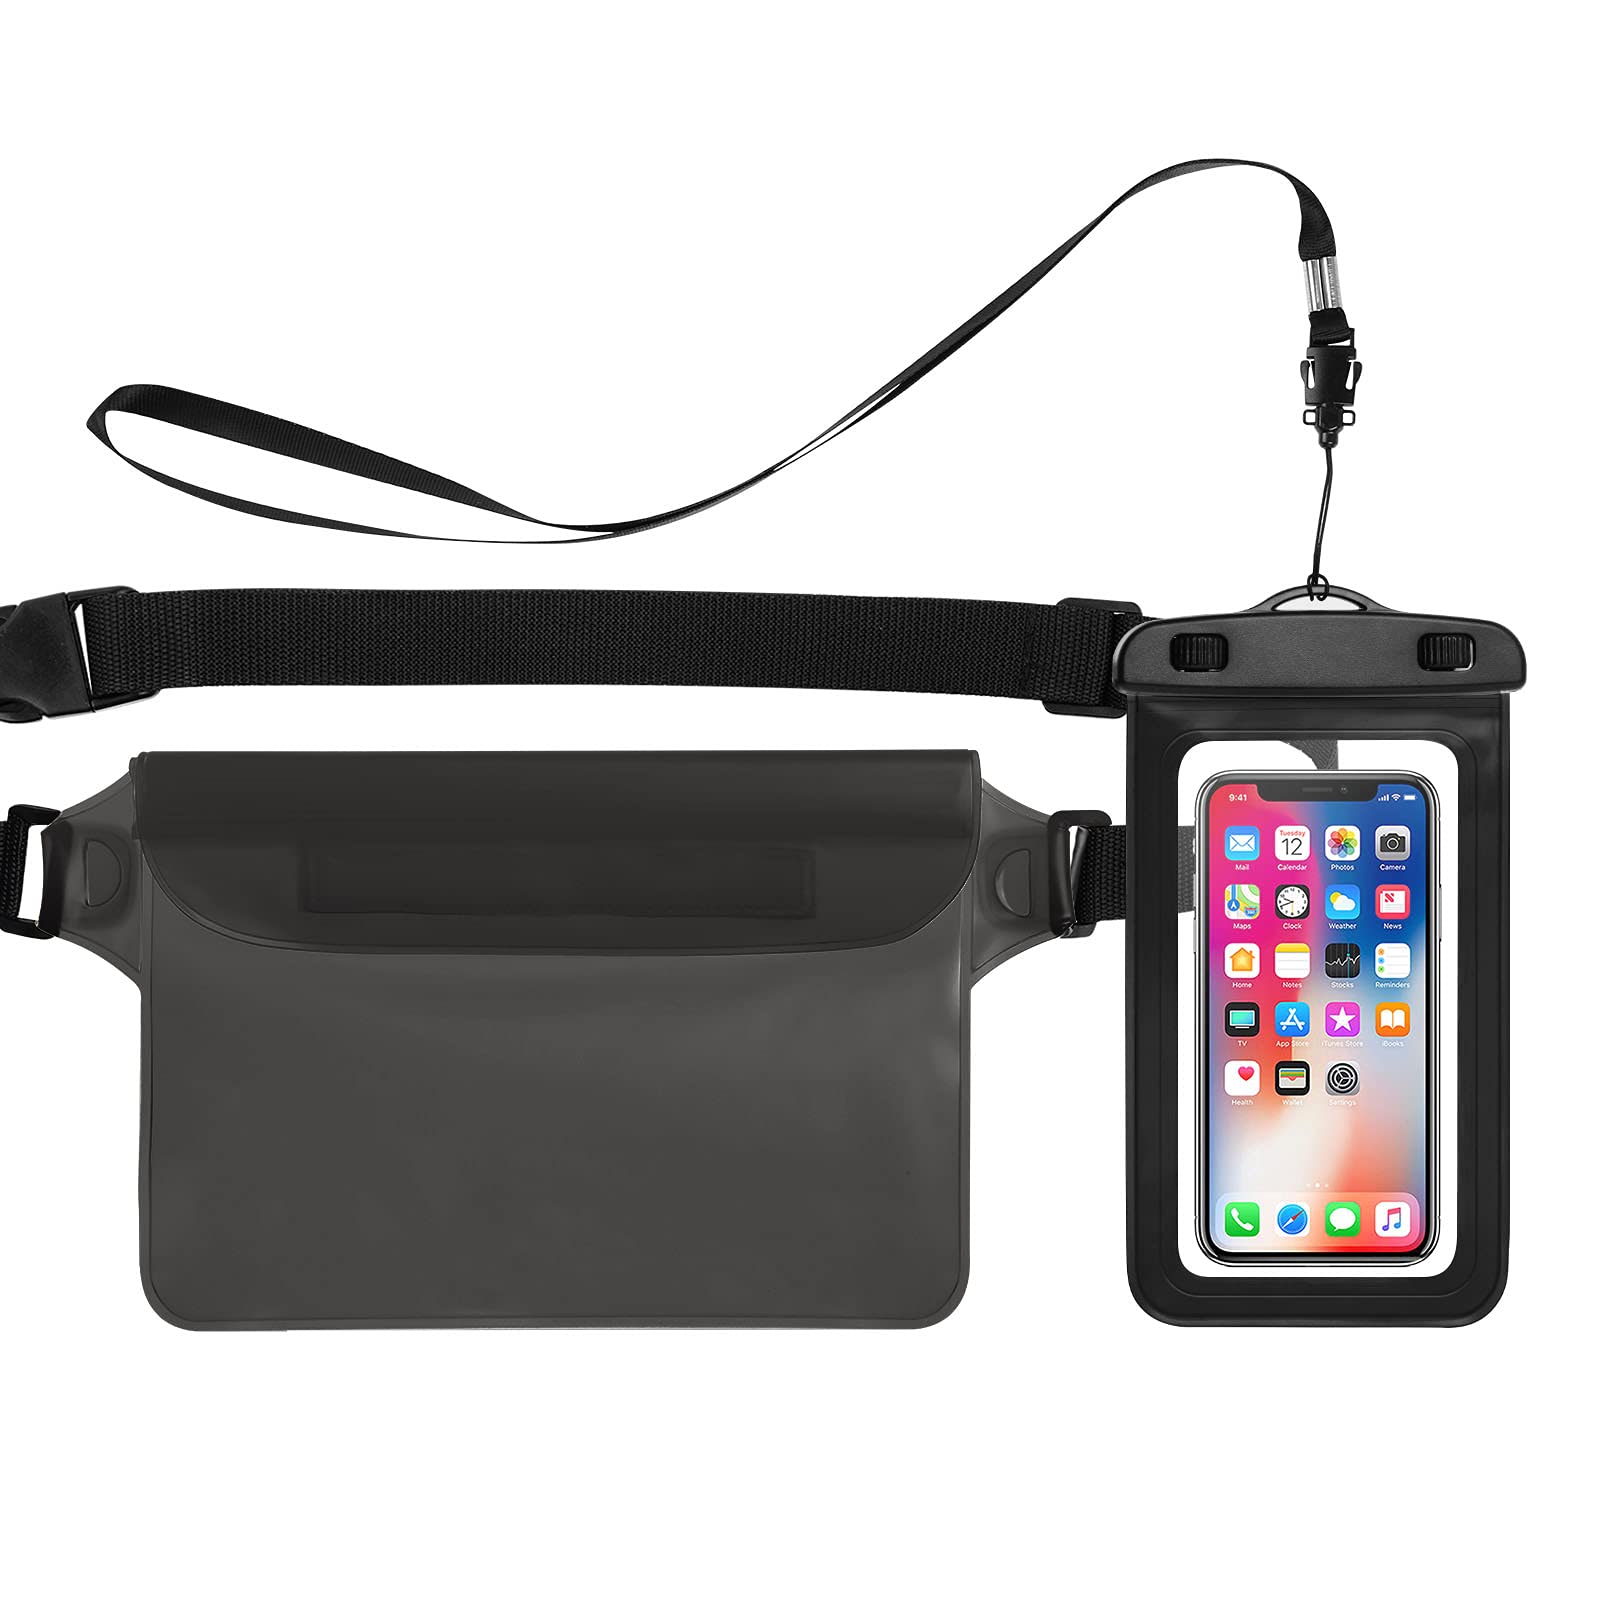 Bigqin Waterproof Phone Case + Waist Bag, Underwater Pouch Dry Bag with Lanyard for Beach Swimming Boating Snorkeling, Protect Phone Up to 6.5"